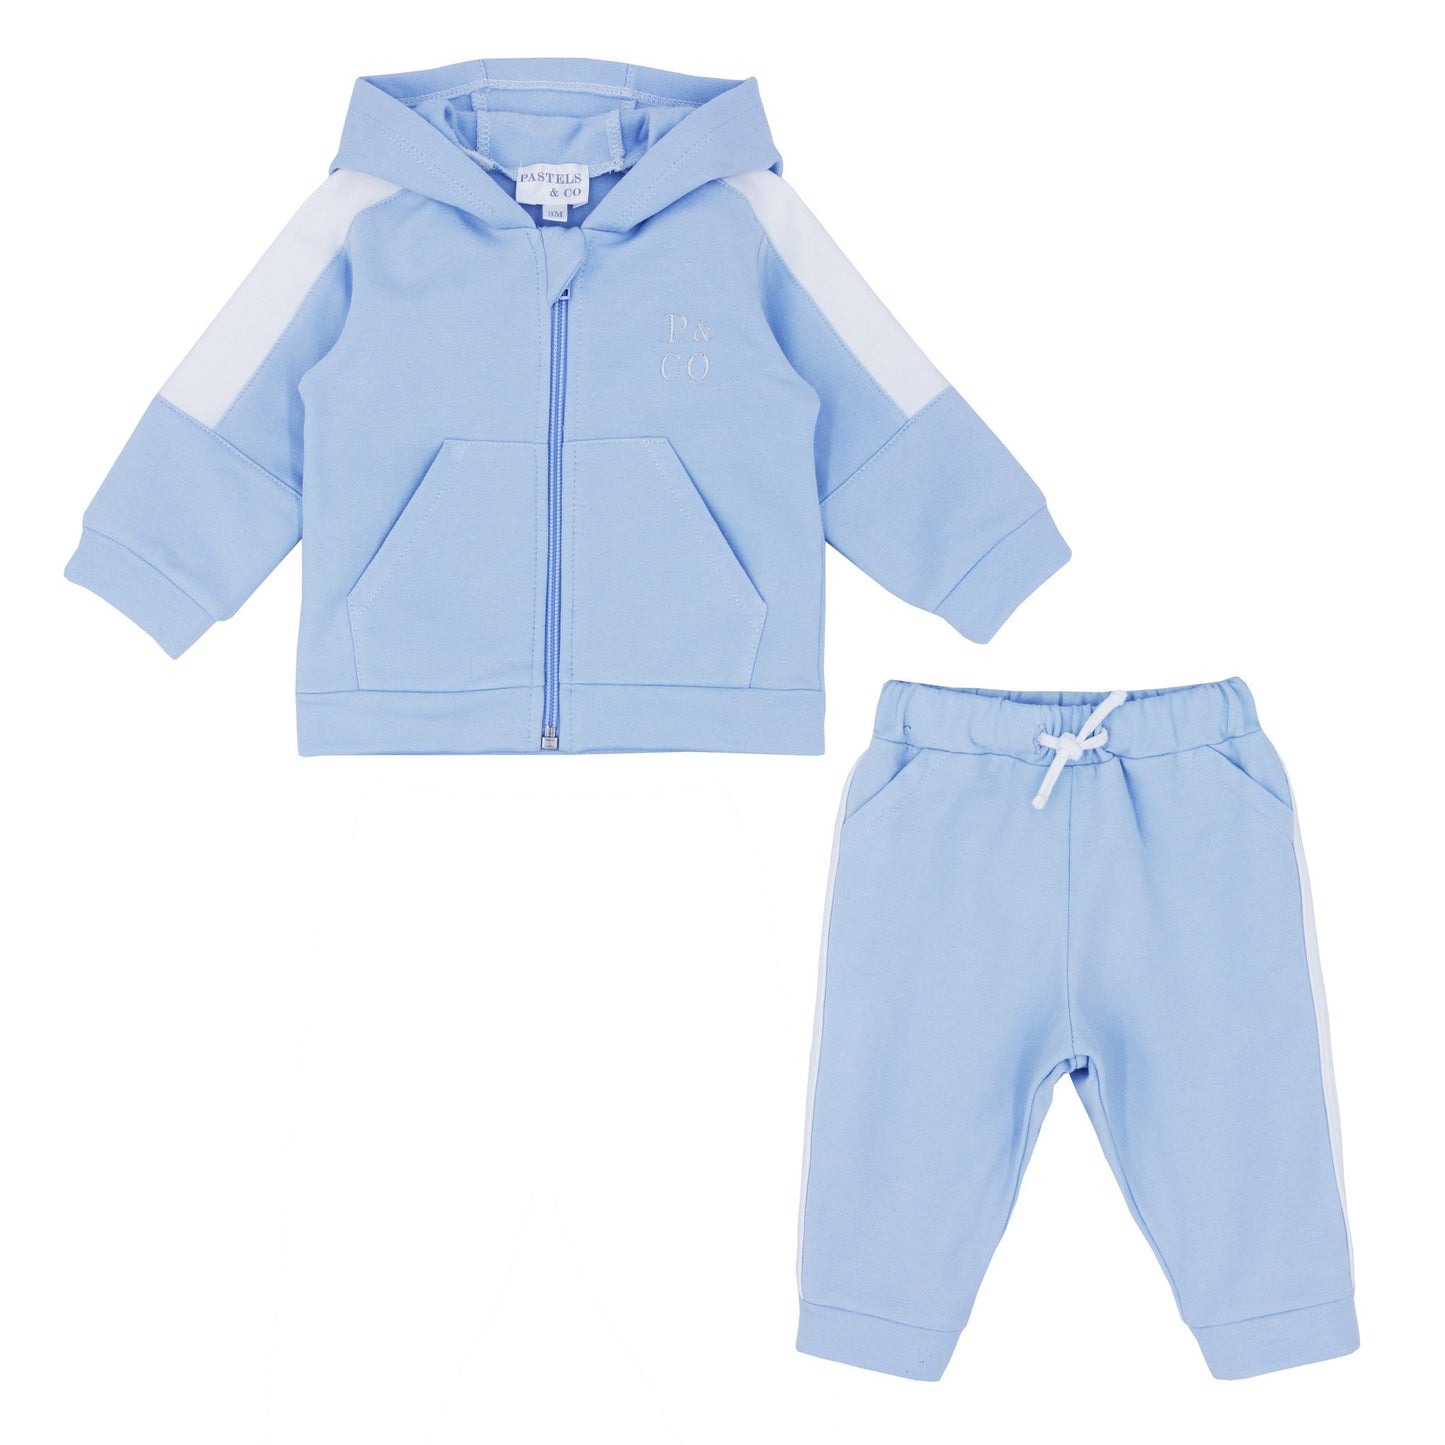 Pastels & Co Boys Tracksuit Angus AW